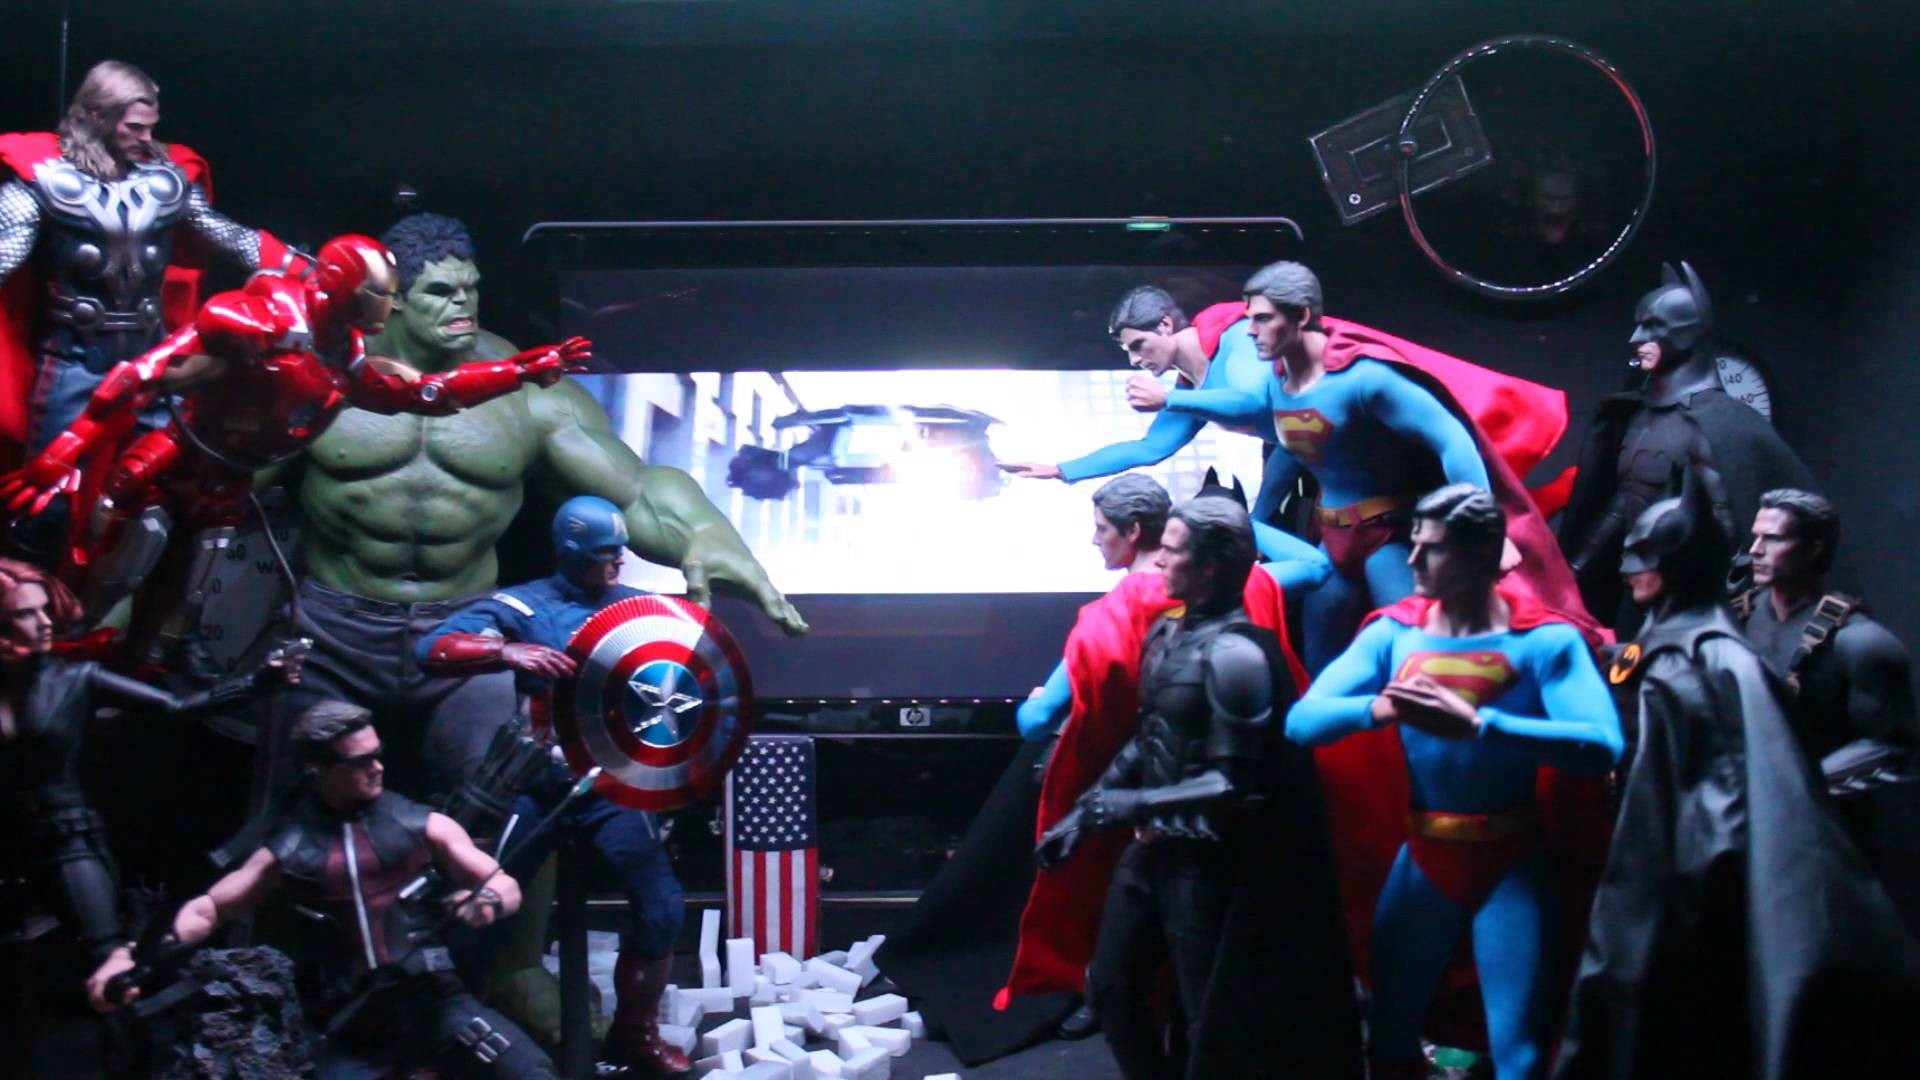 1920x1080 HOT TOYS in collaboration with DC vs MARVEL JUSTICE LEAGUE -vs- AVENGERS -  YouTube